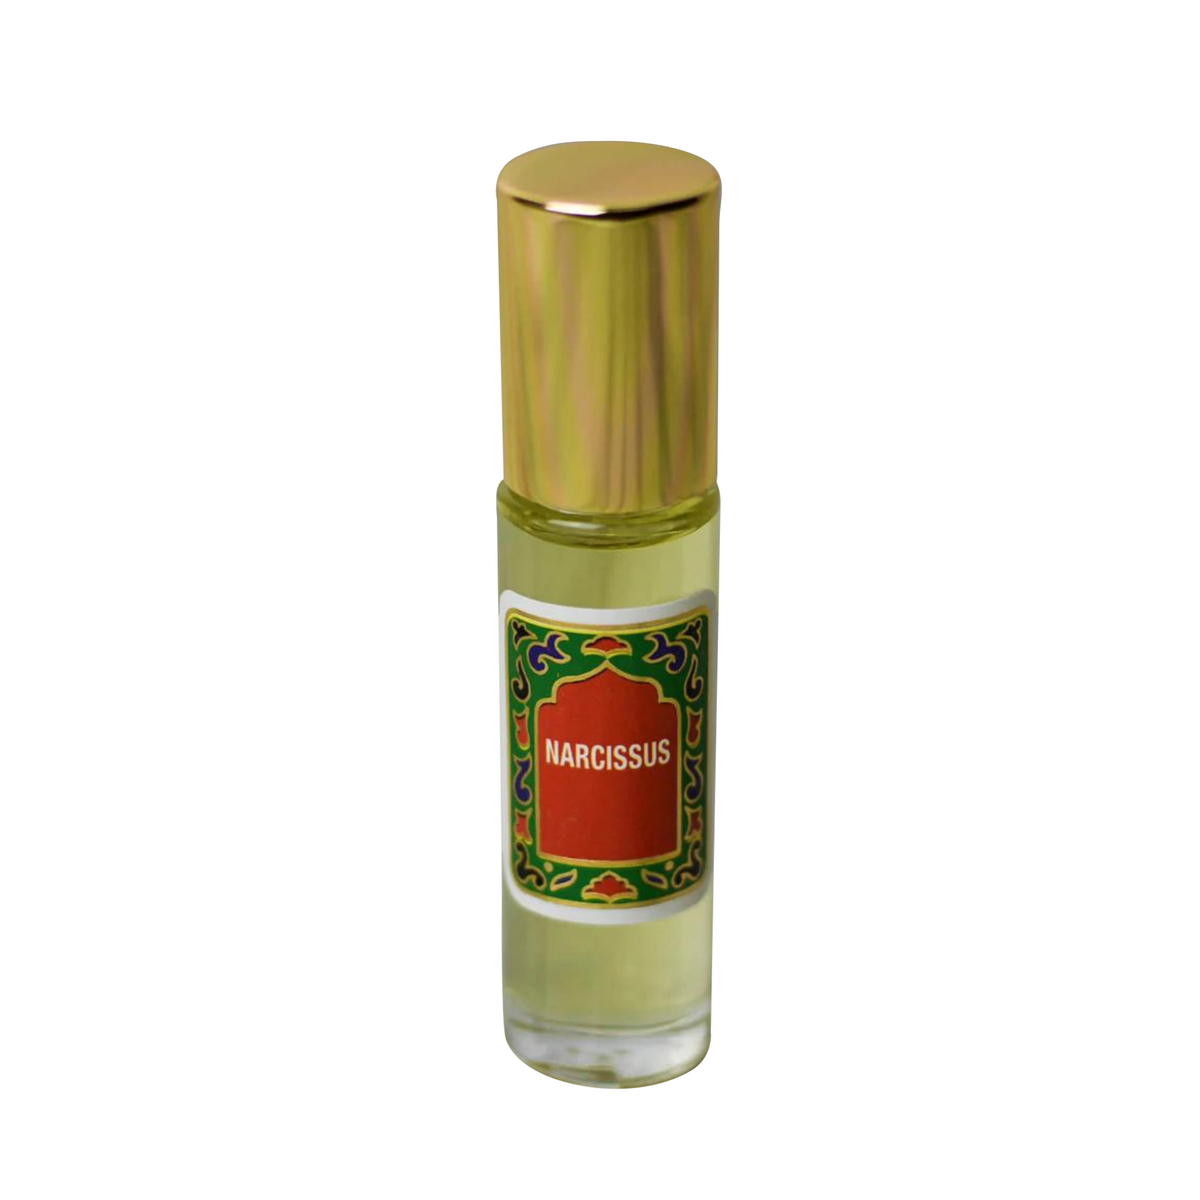 Primary image of Narcissus Fragrance Roll-On